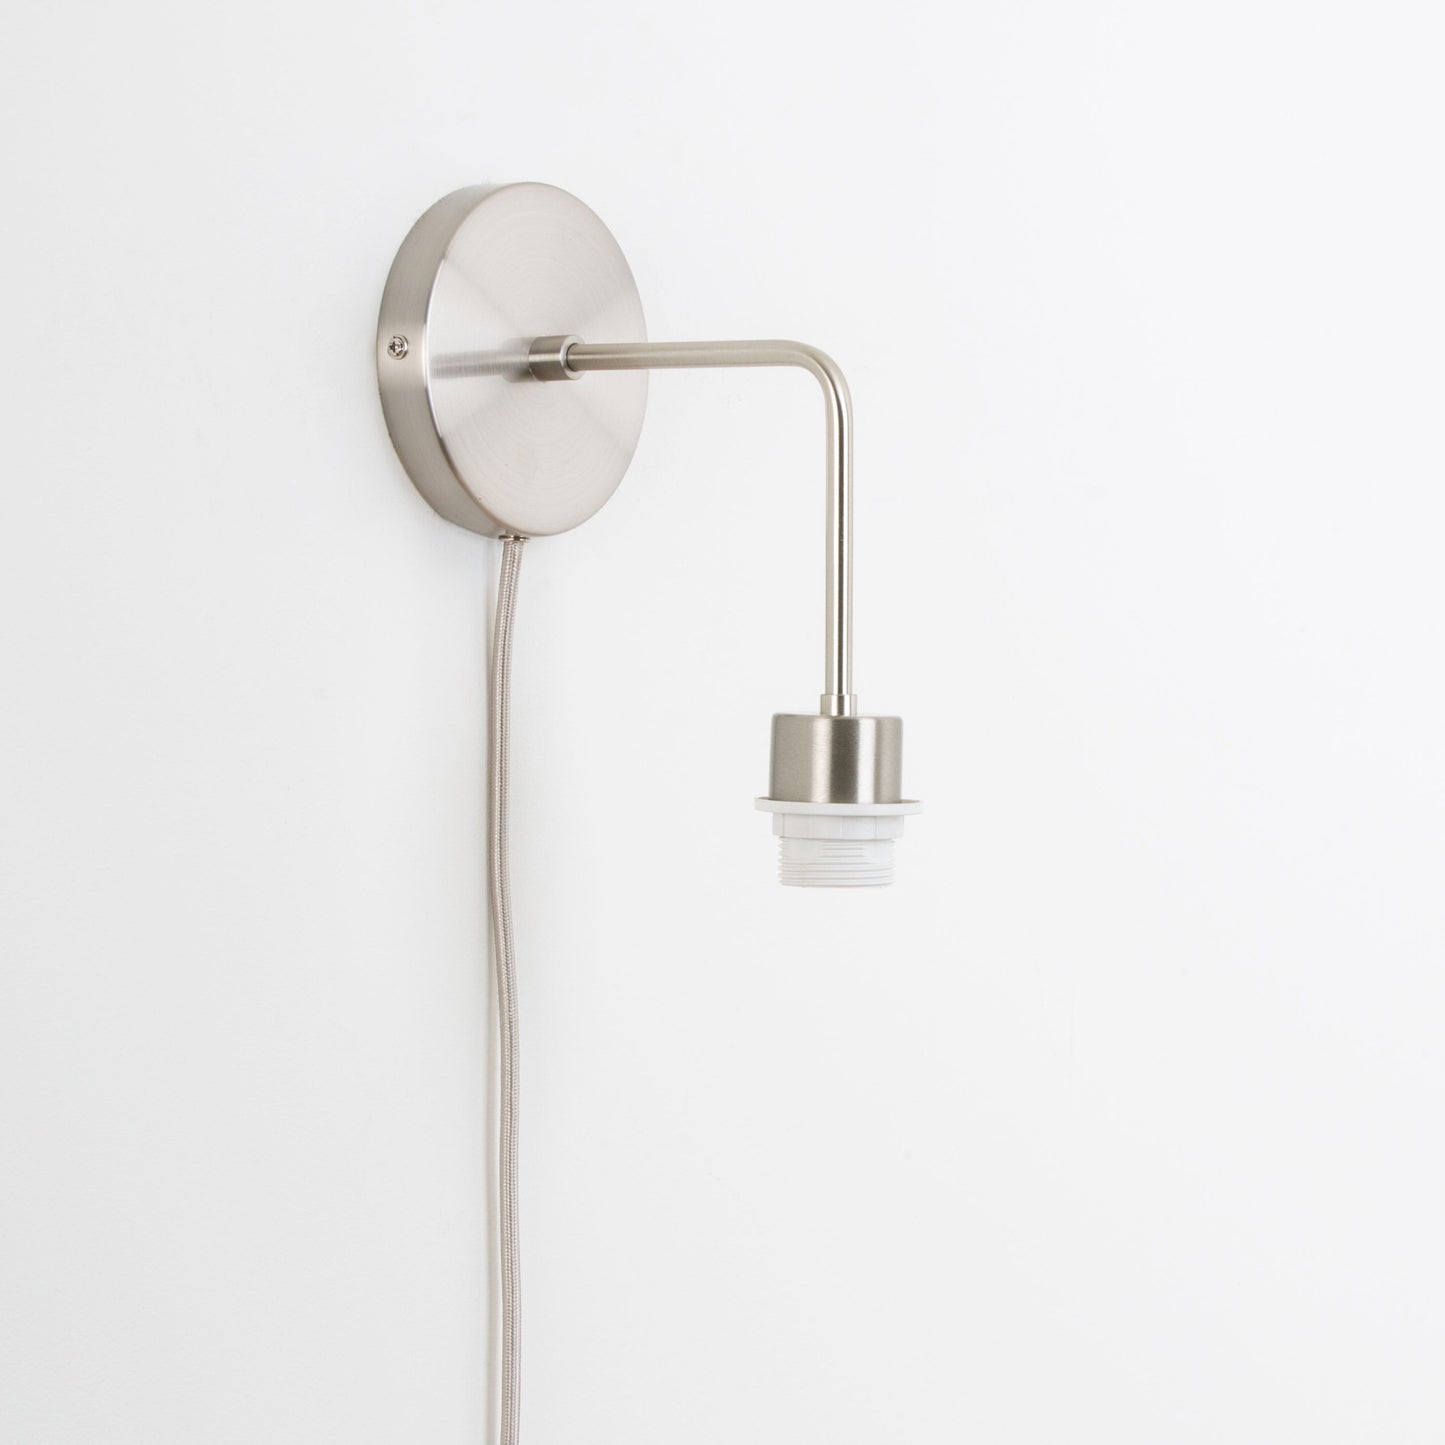 Plug-In Bend Solo Shade-Ready Sconce